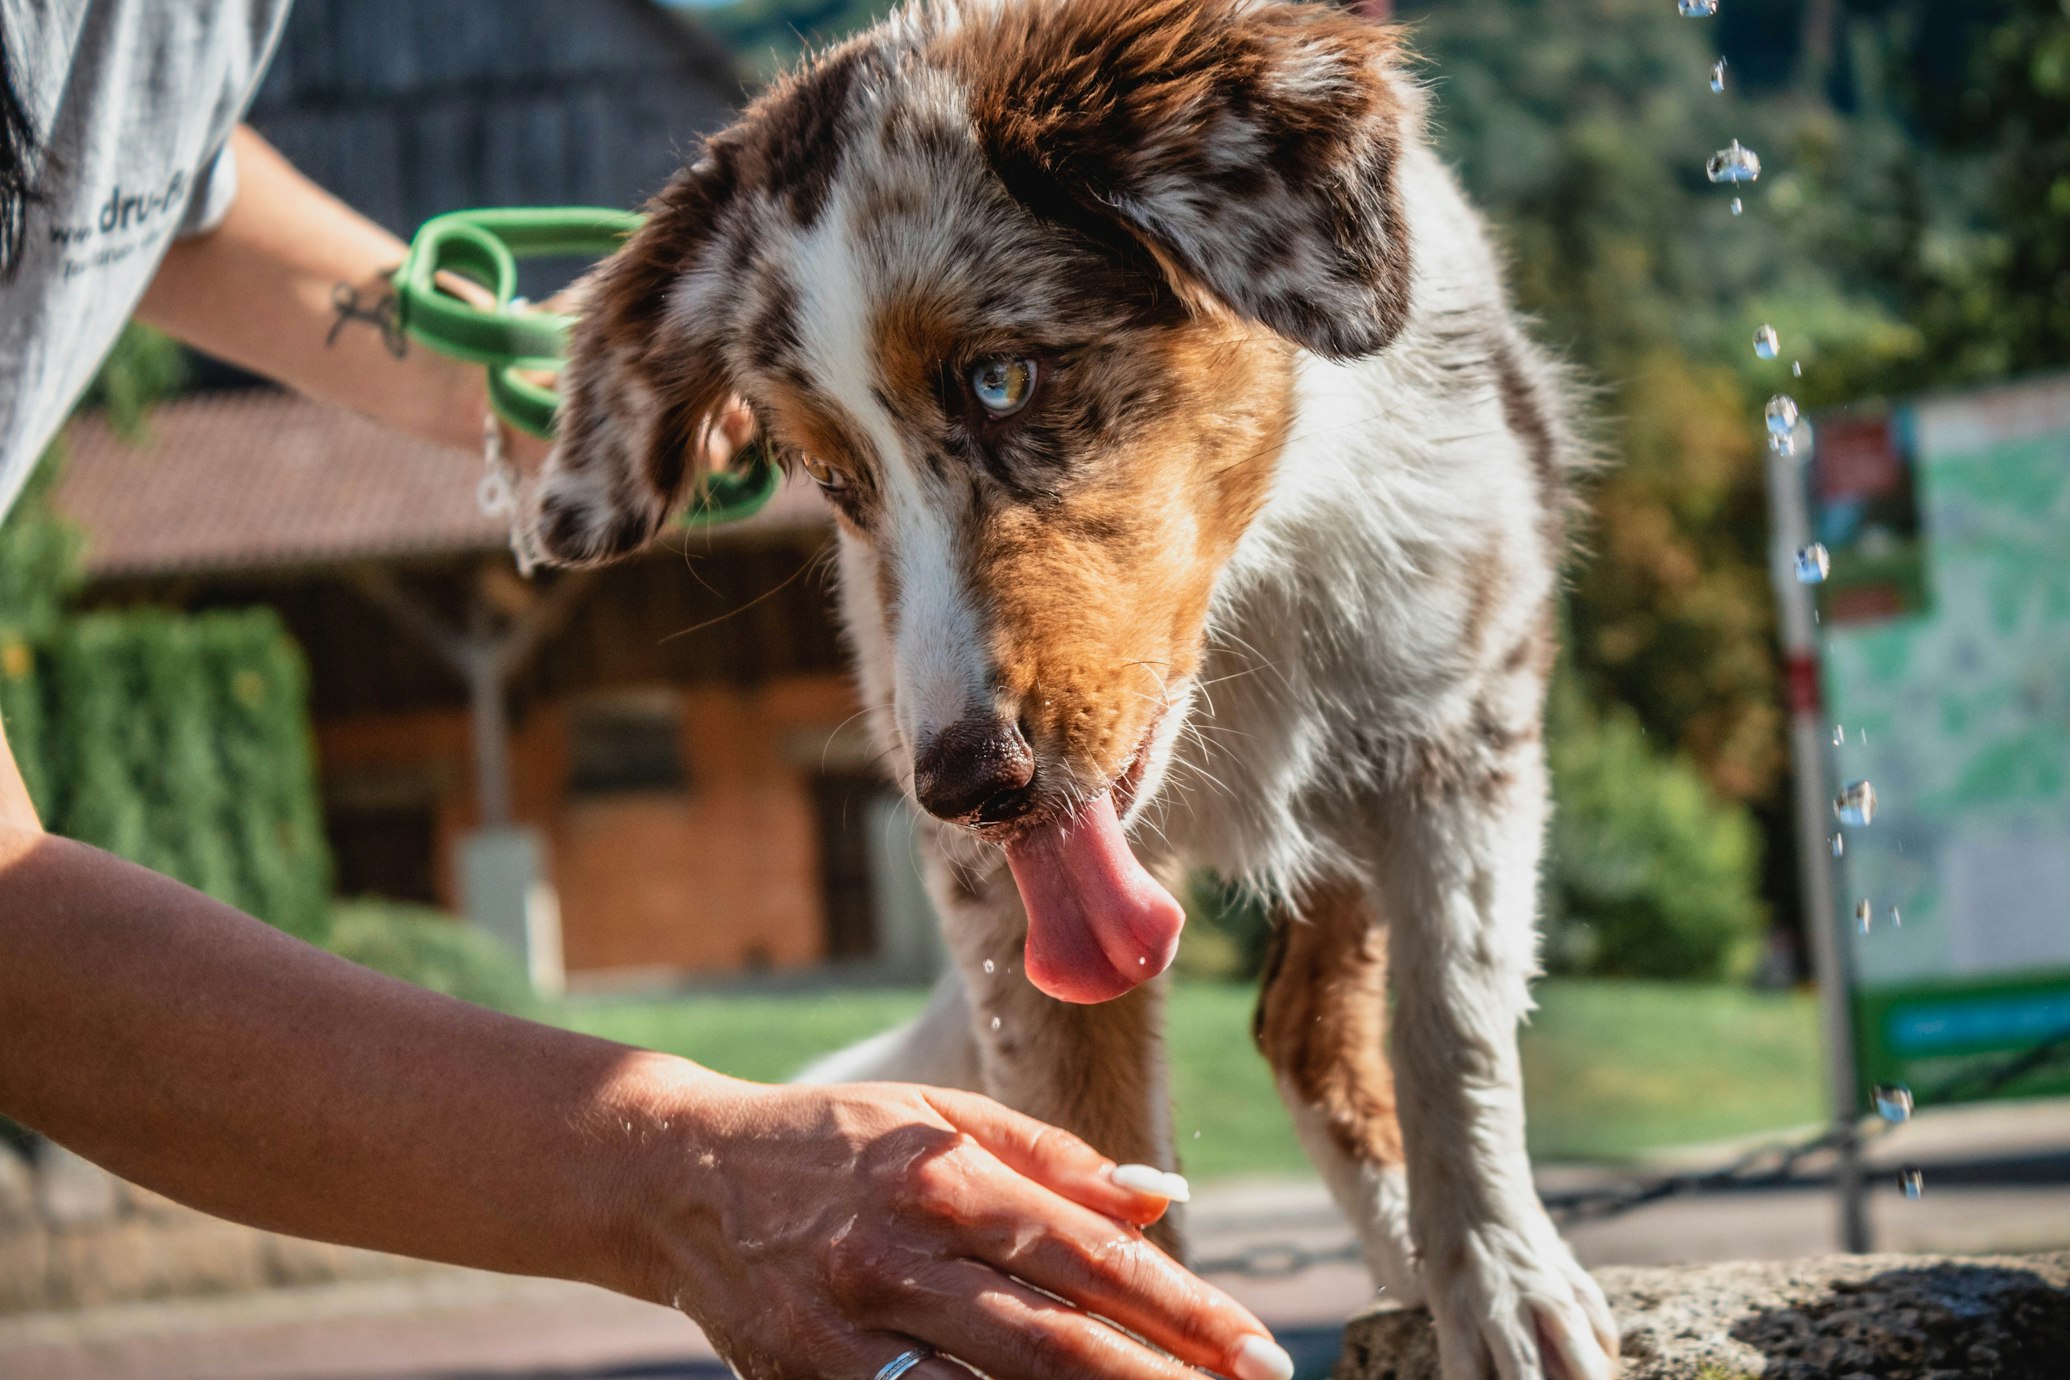 Why Do Dogs Lick Their Wounds?